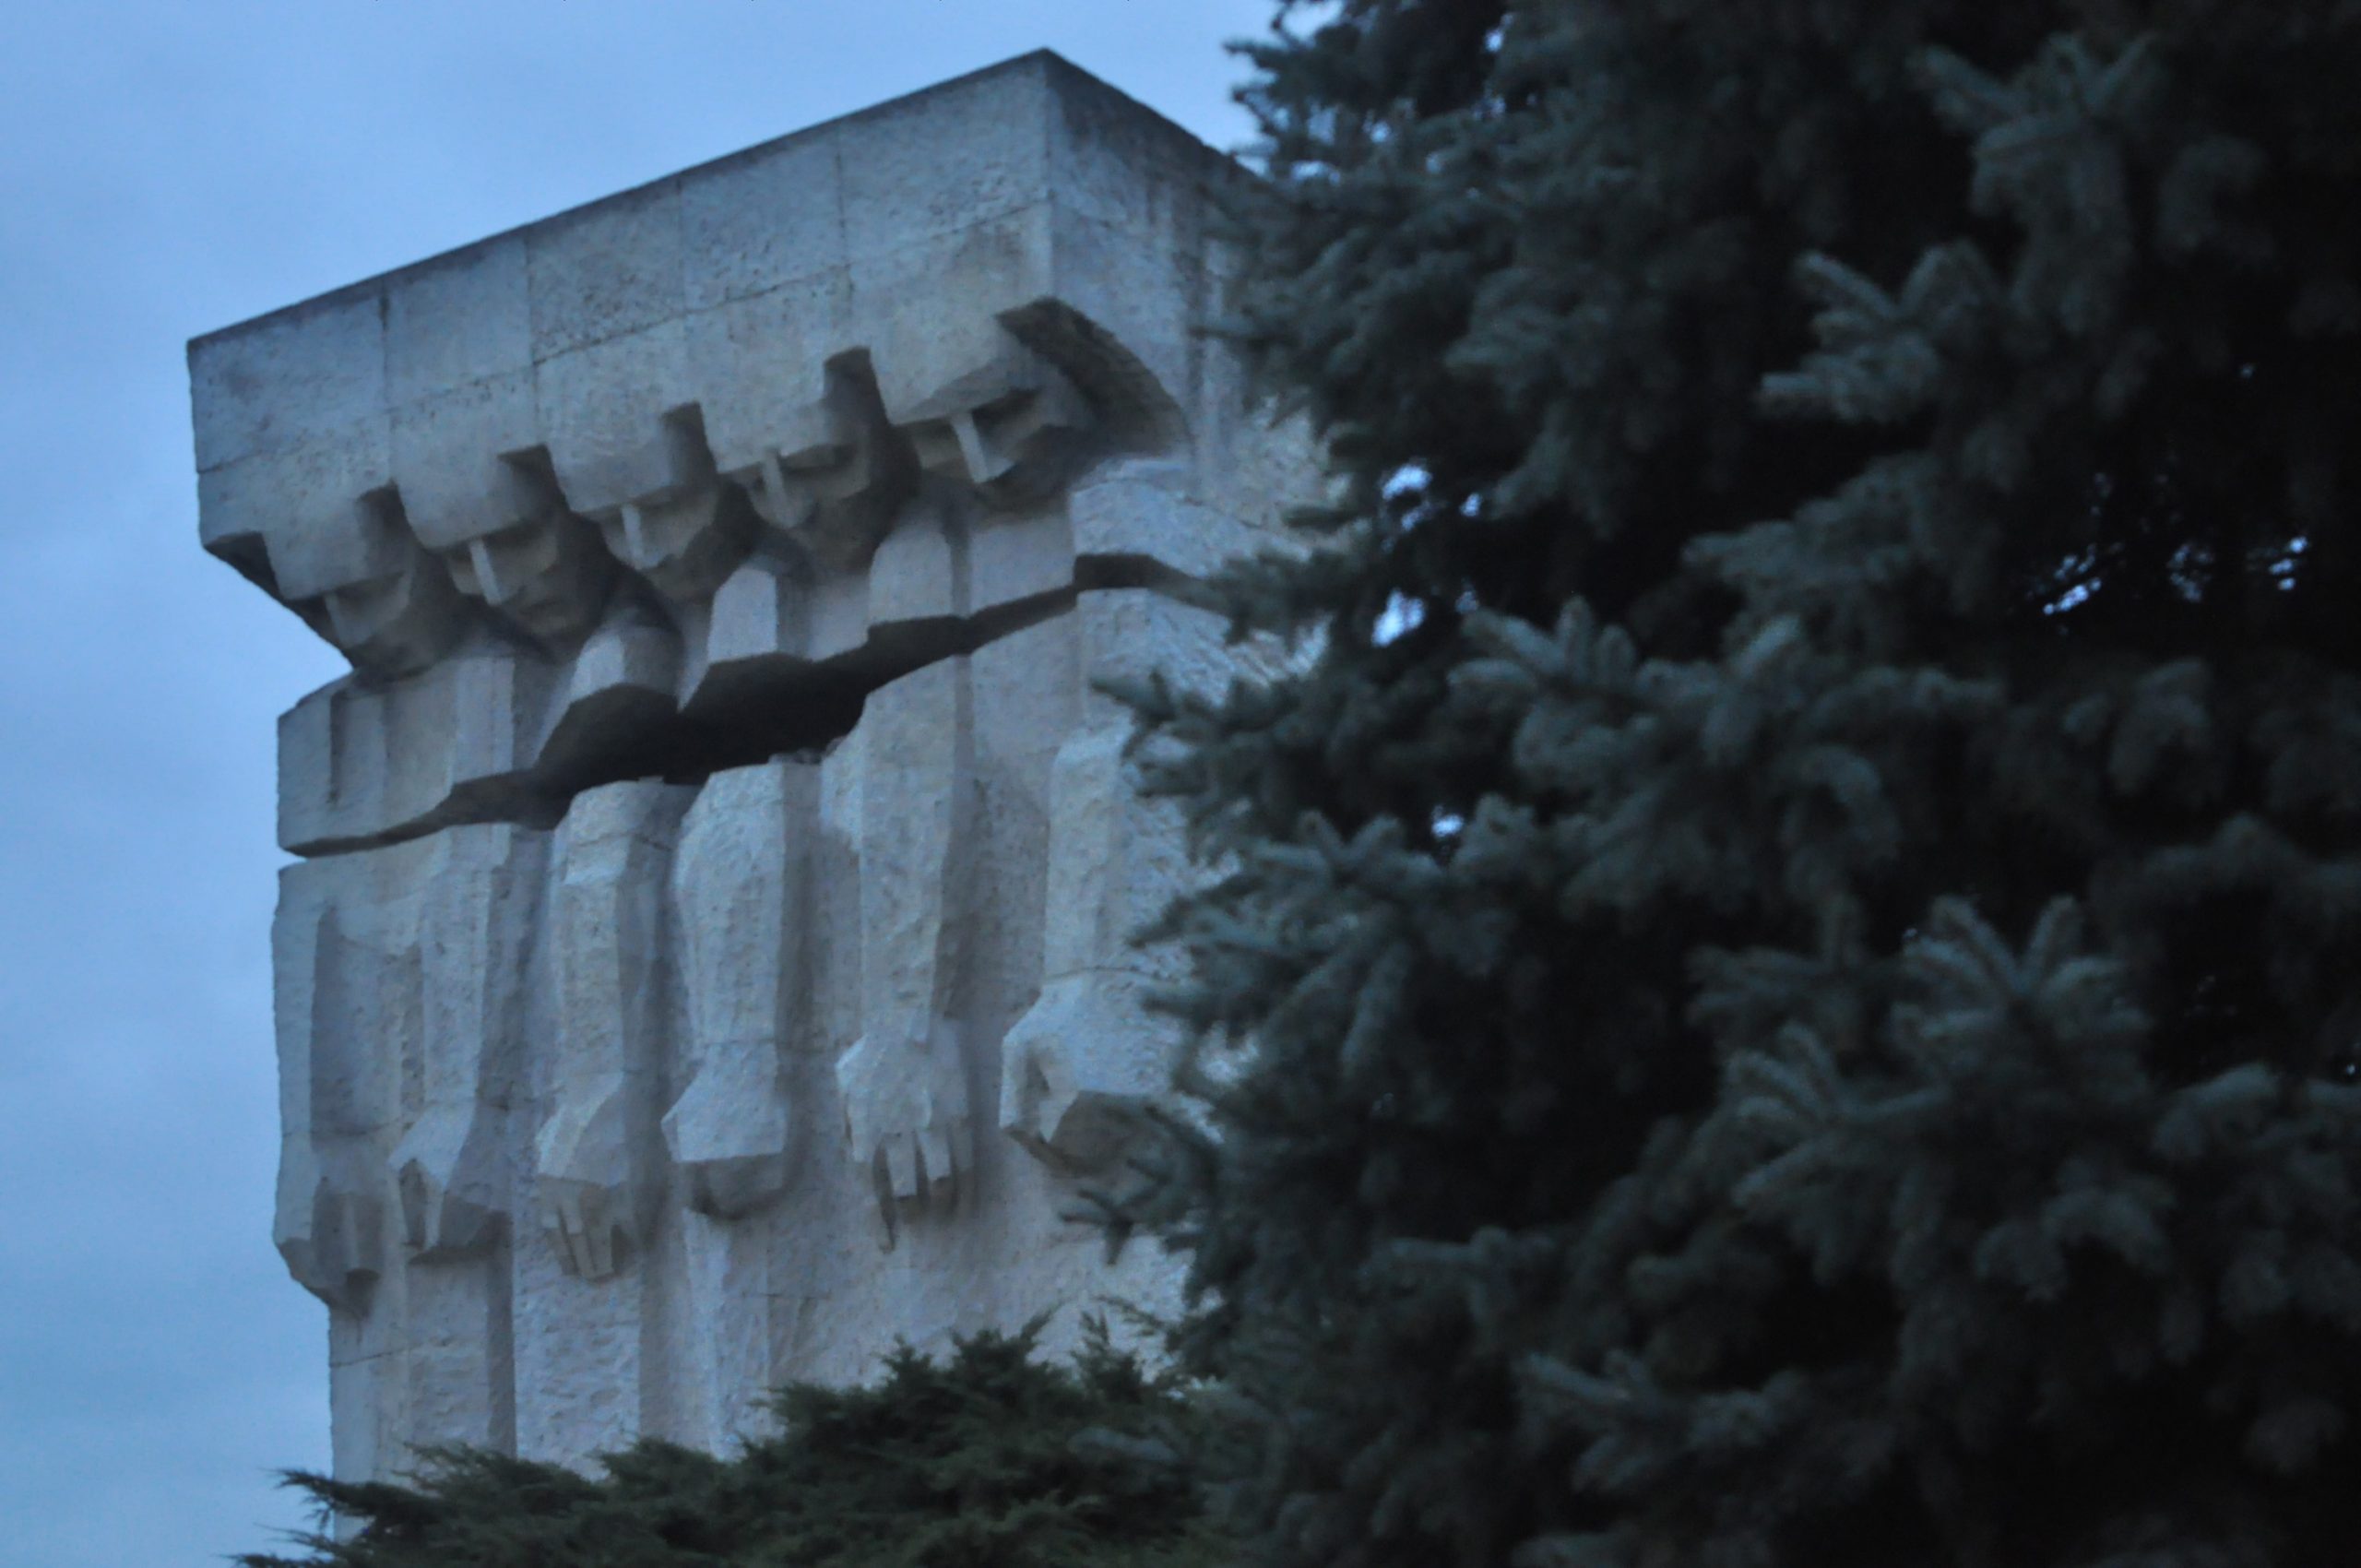 Soviet Memorial to the Victims of Fascism at Plaszow Concentration Camp